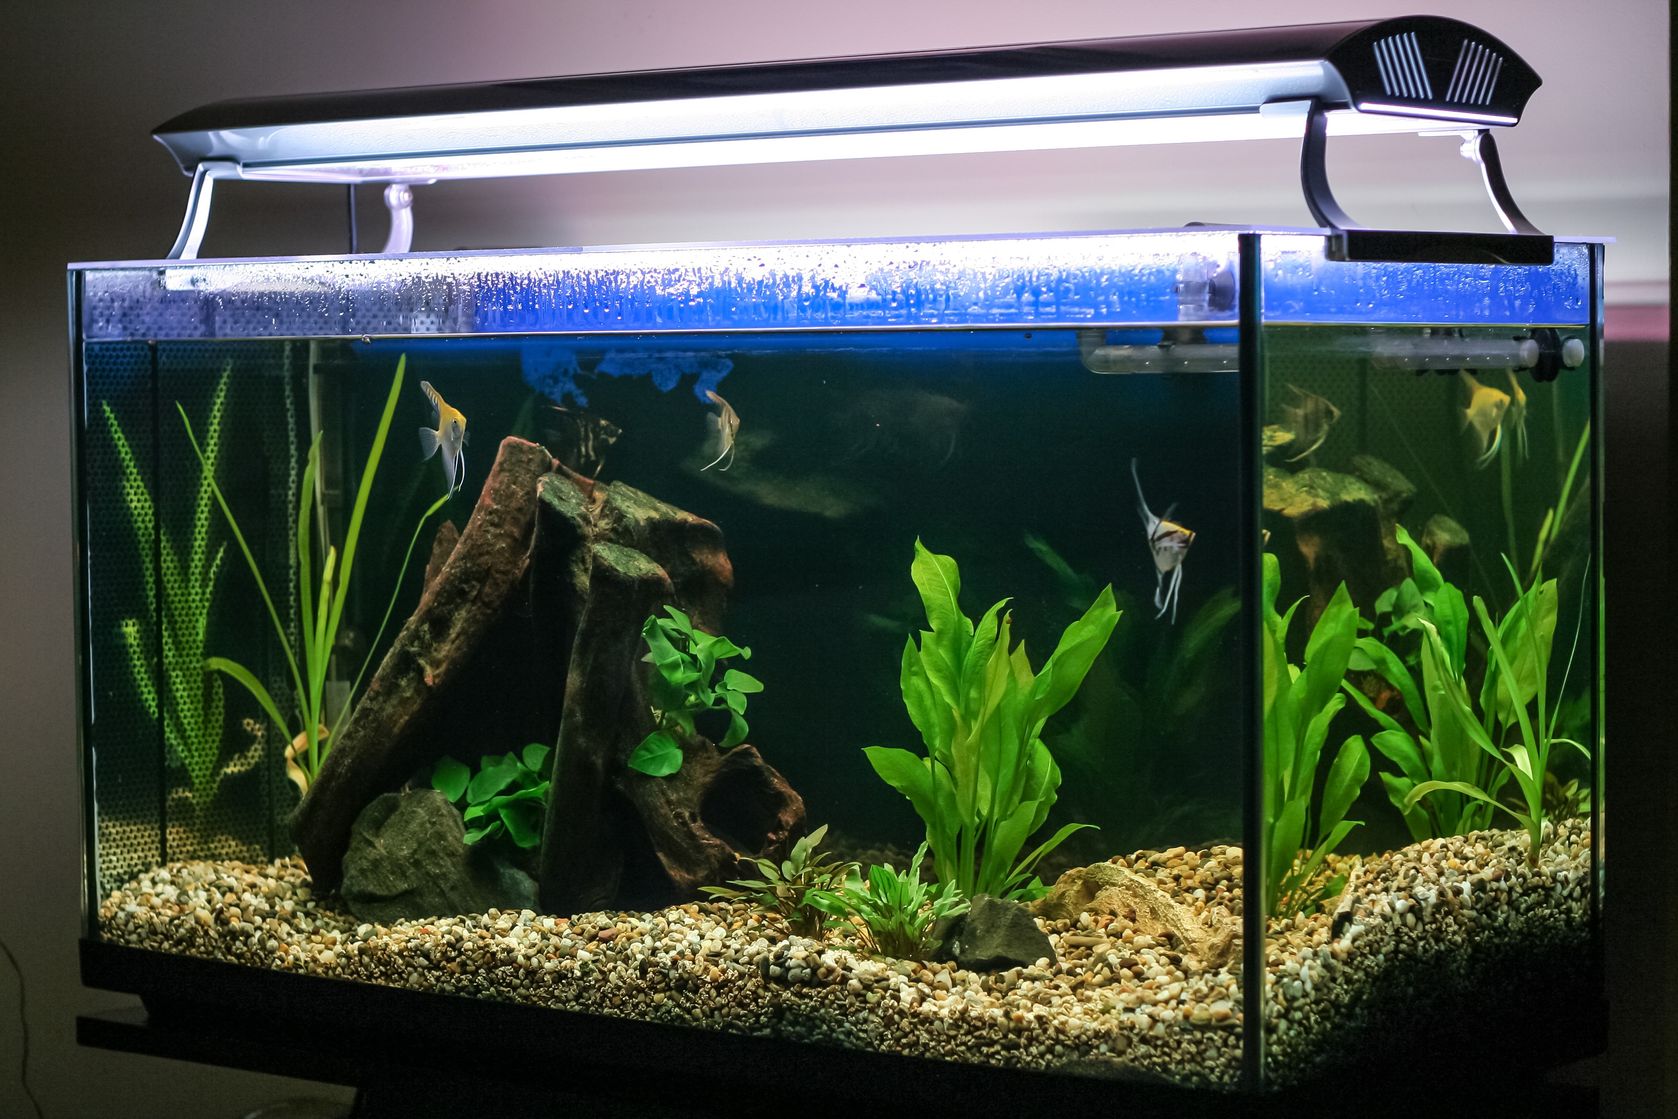 https://premierevanlines.com/wp-content/uploads/2022/02/How-to-Move-a-Fish-Tank.jpeg